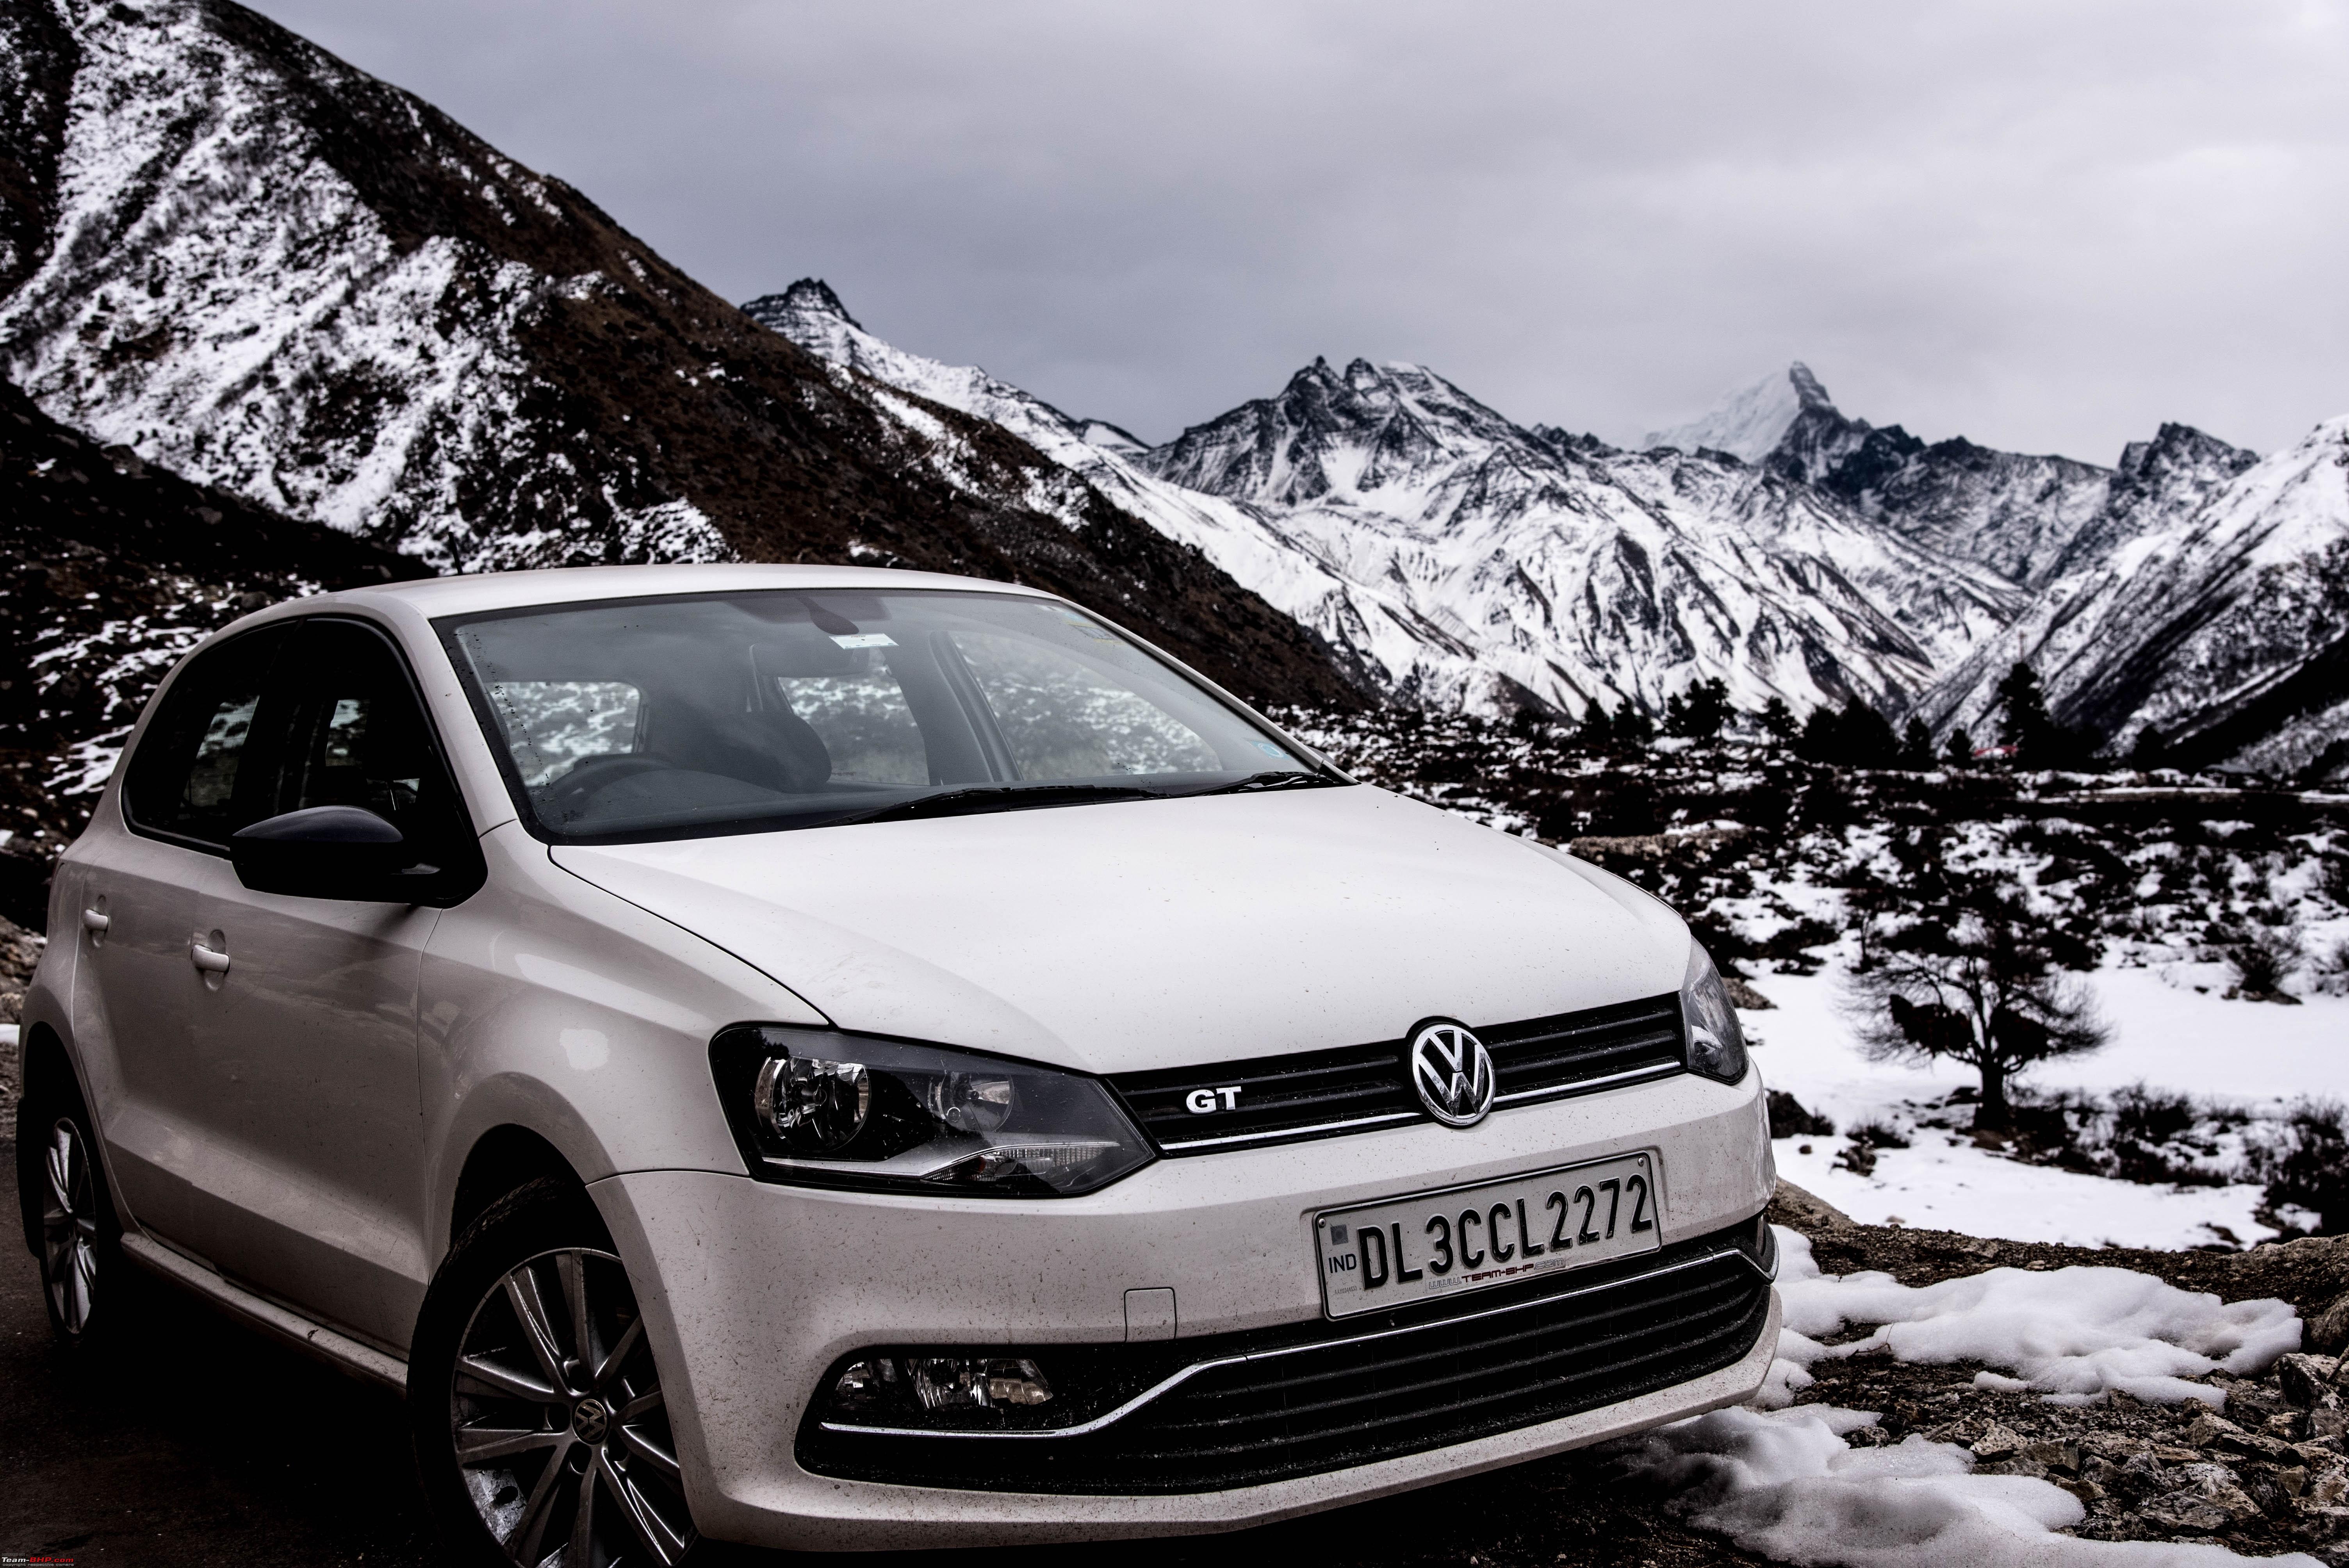 Volkswagen Polo 1.2L GT TSI : Official Review - Page 336 - Team-BHP